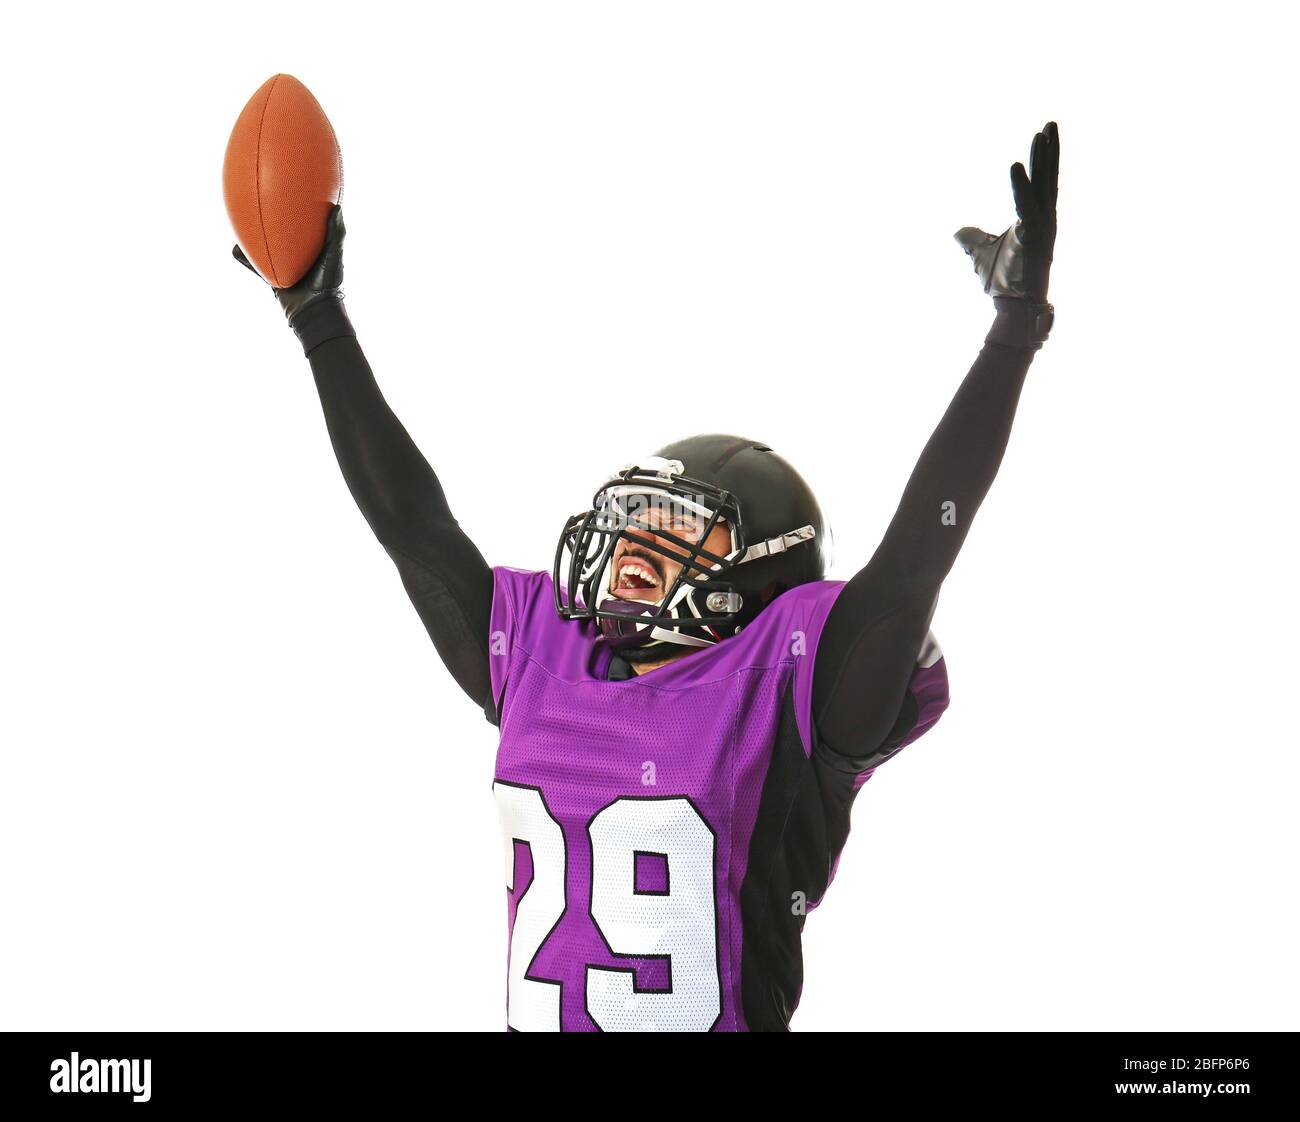 Indianapolis Colts vs. Minnesota Vikings . NFL Game. American Football  League match. Silhouette of professional player celebrate touch down.  Screen in Stock Photo - Alamy